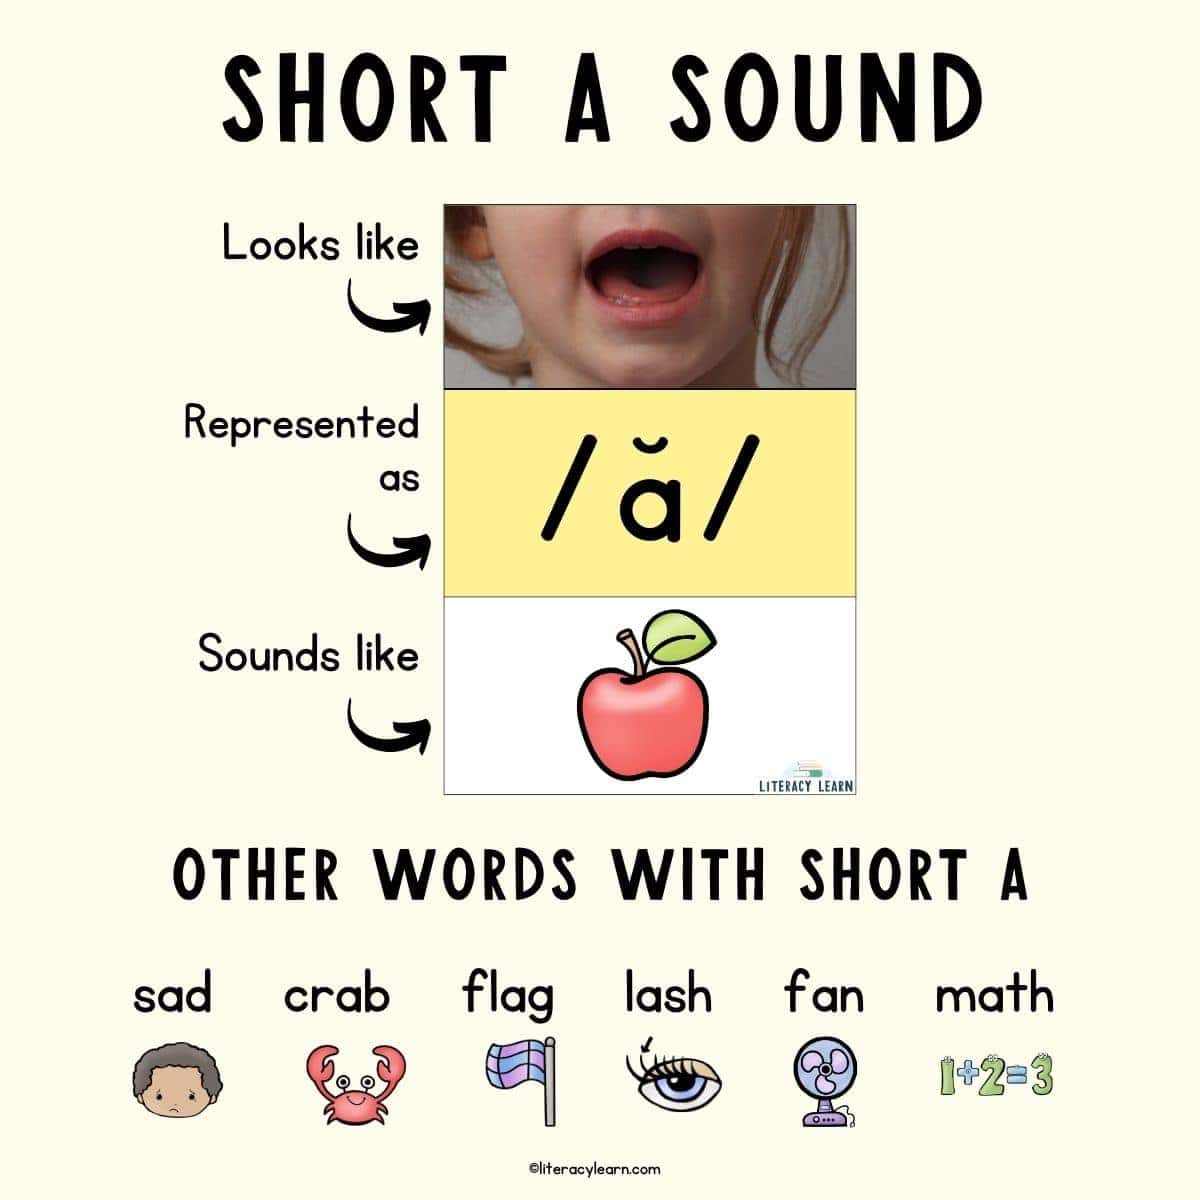 Graphic entitled "Short A Sound" with details like short a words and pictures.